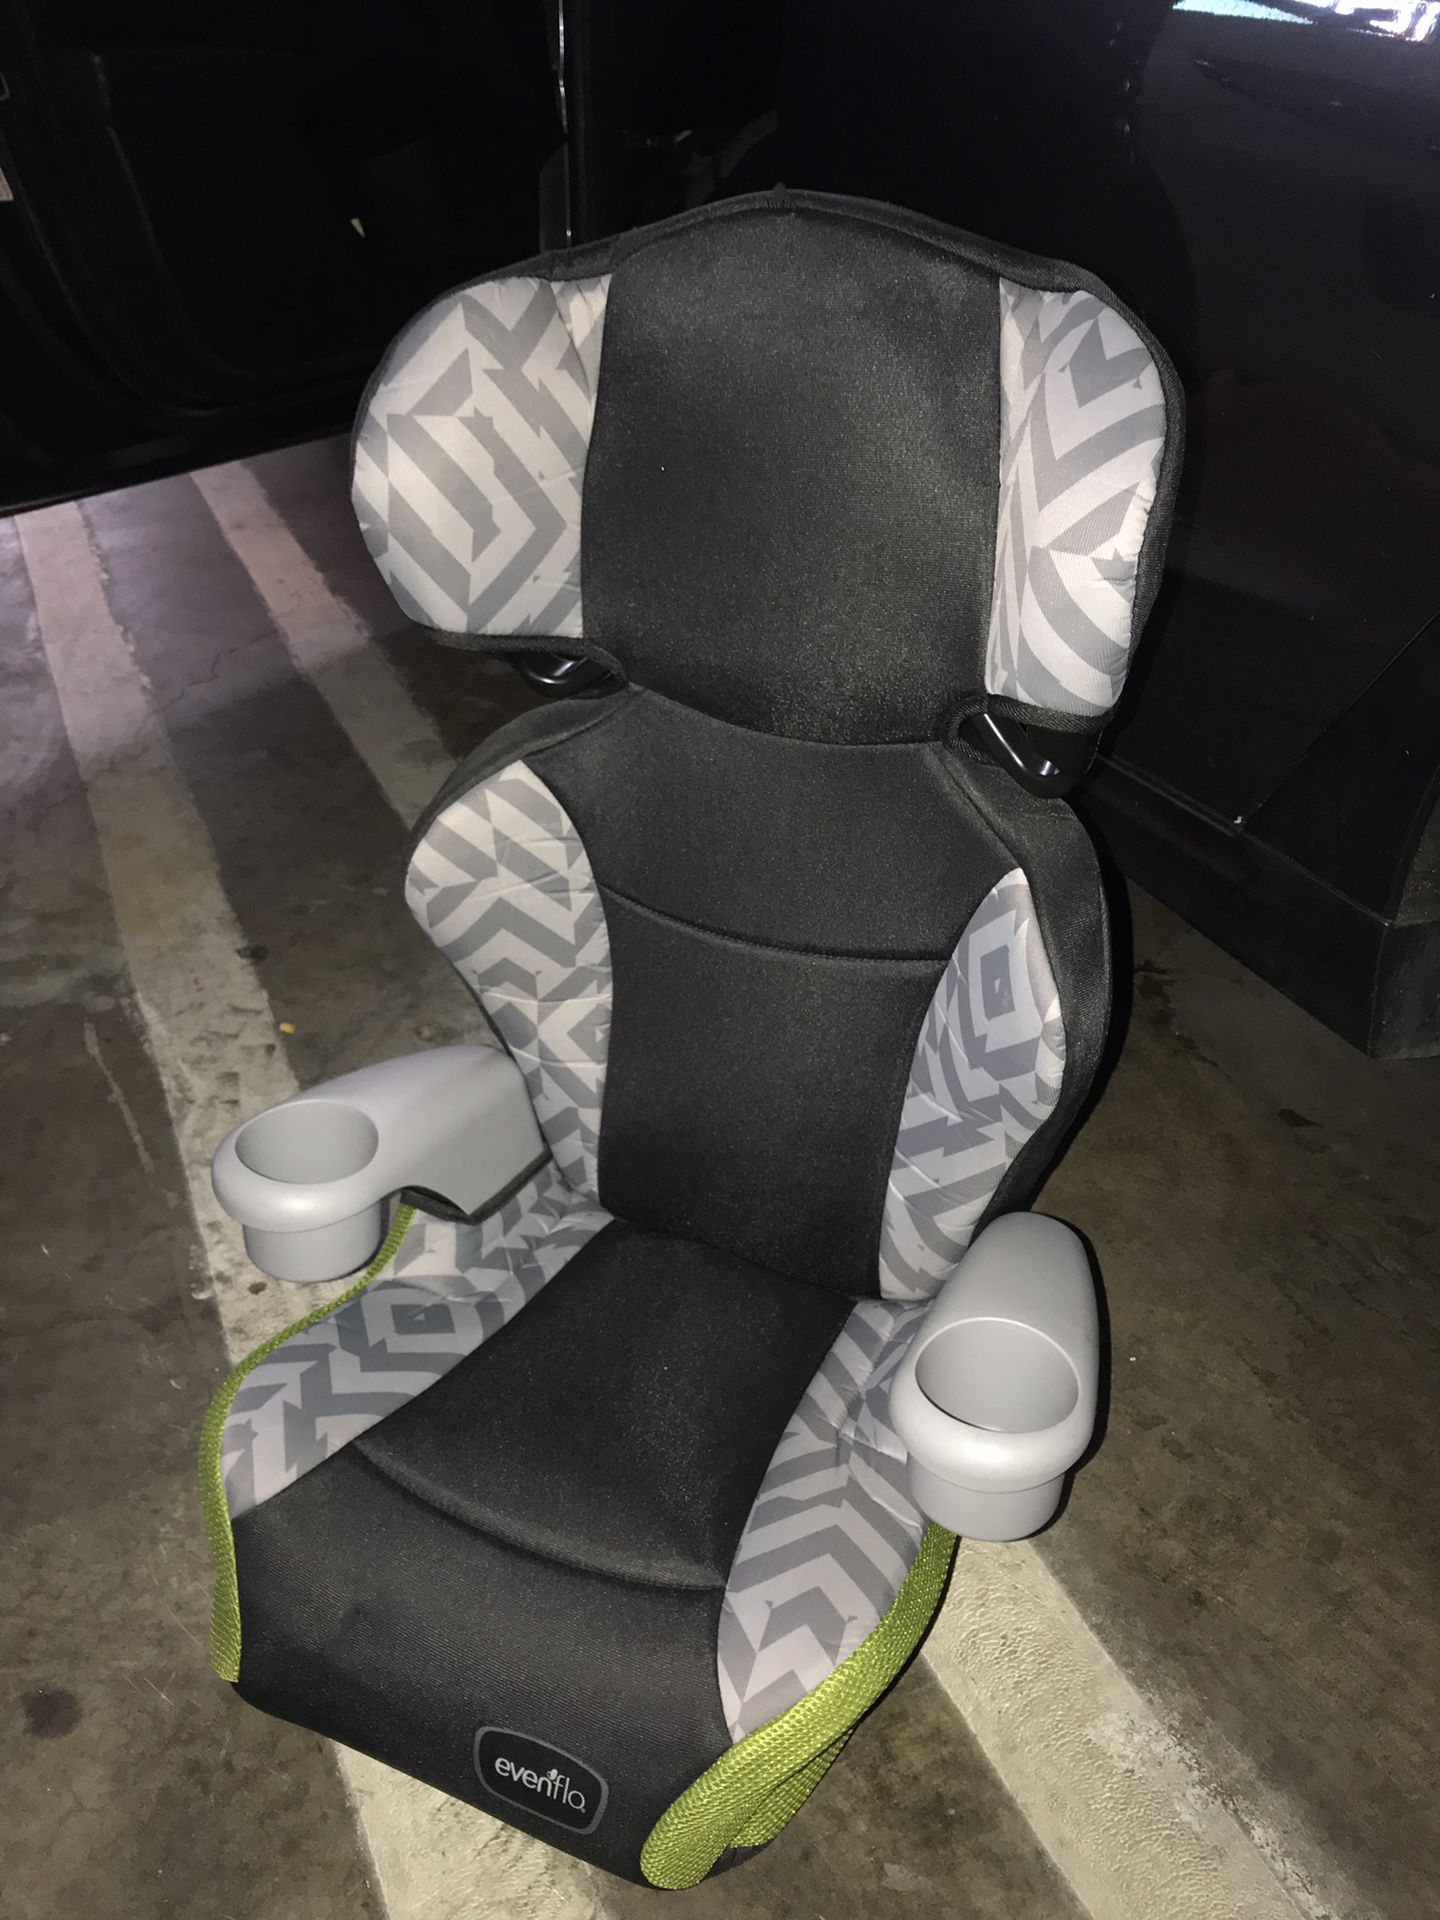 Evenflo Child car booster seat